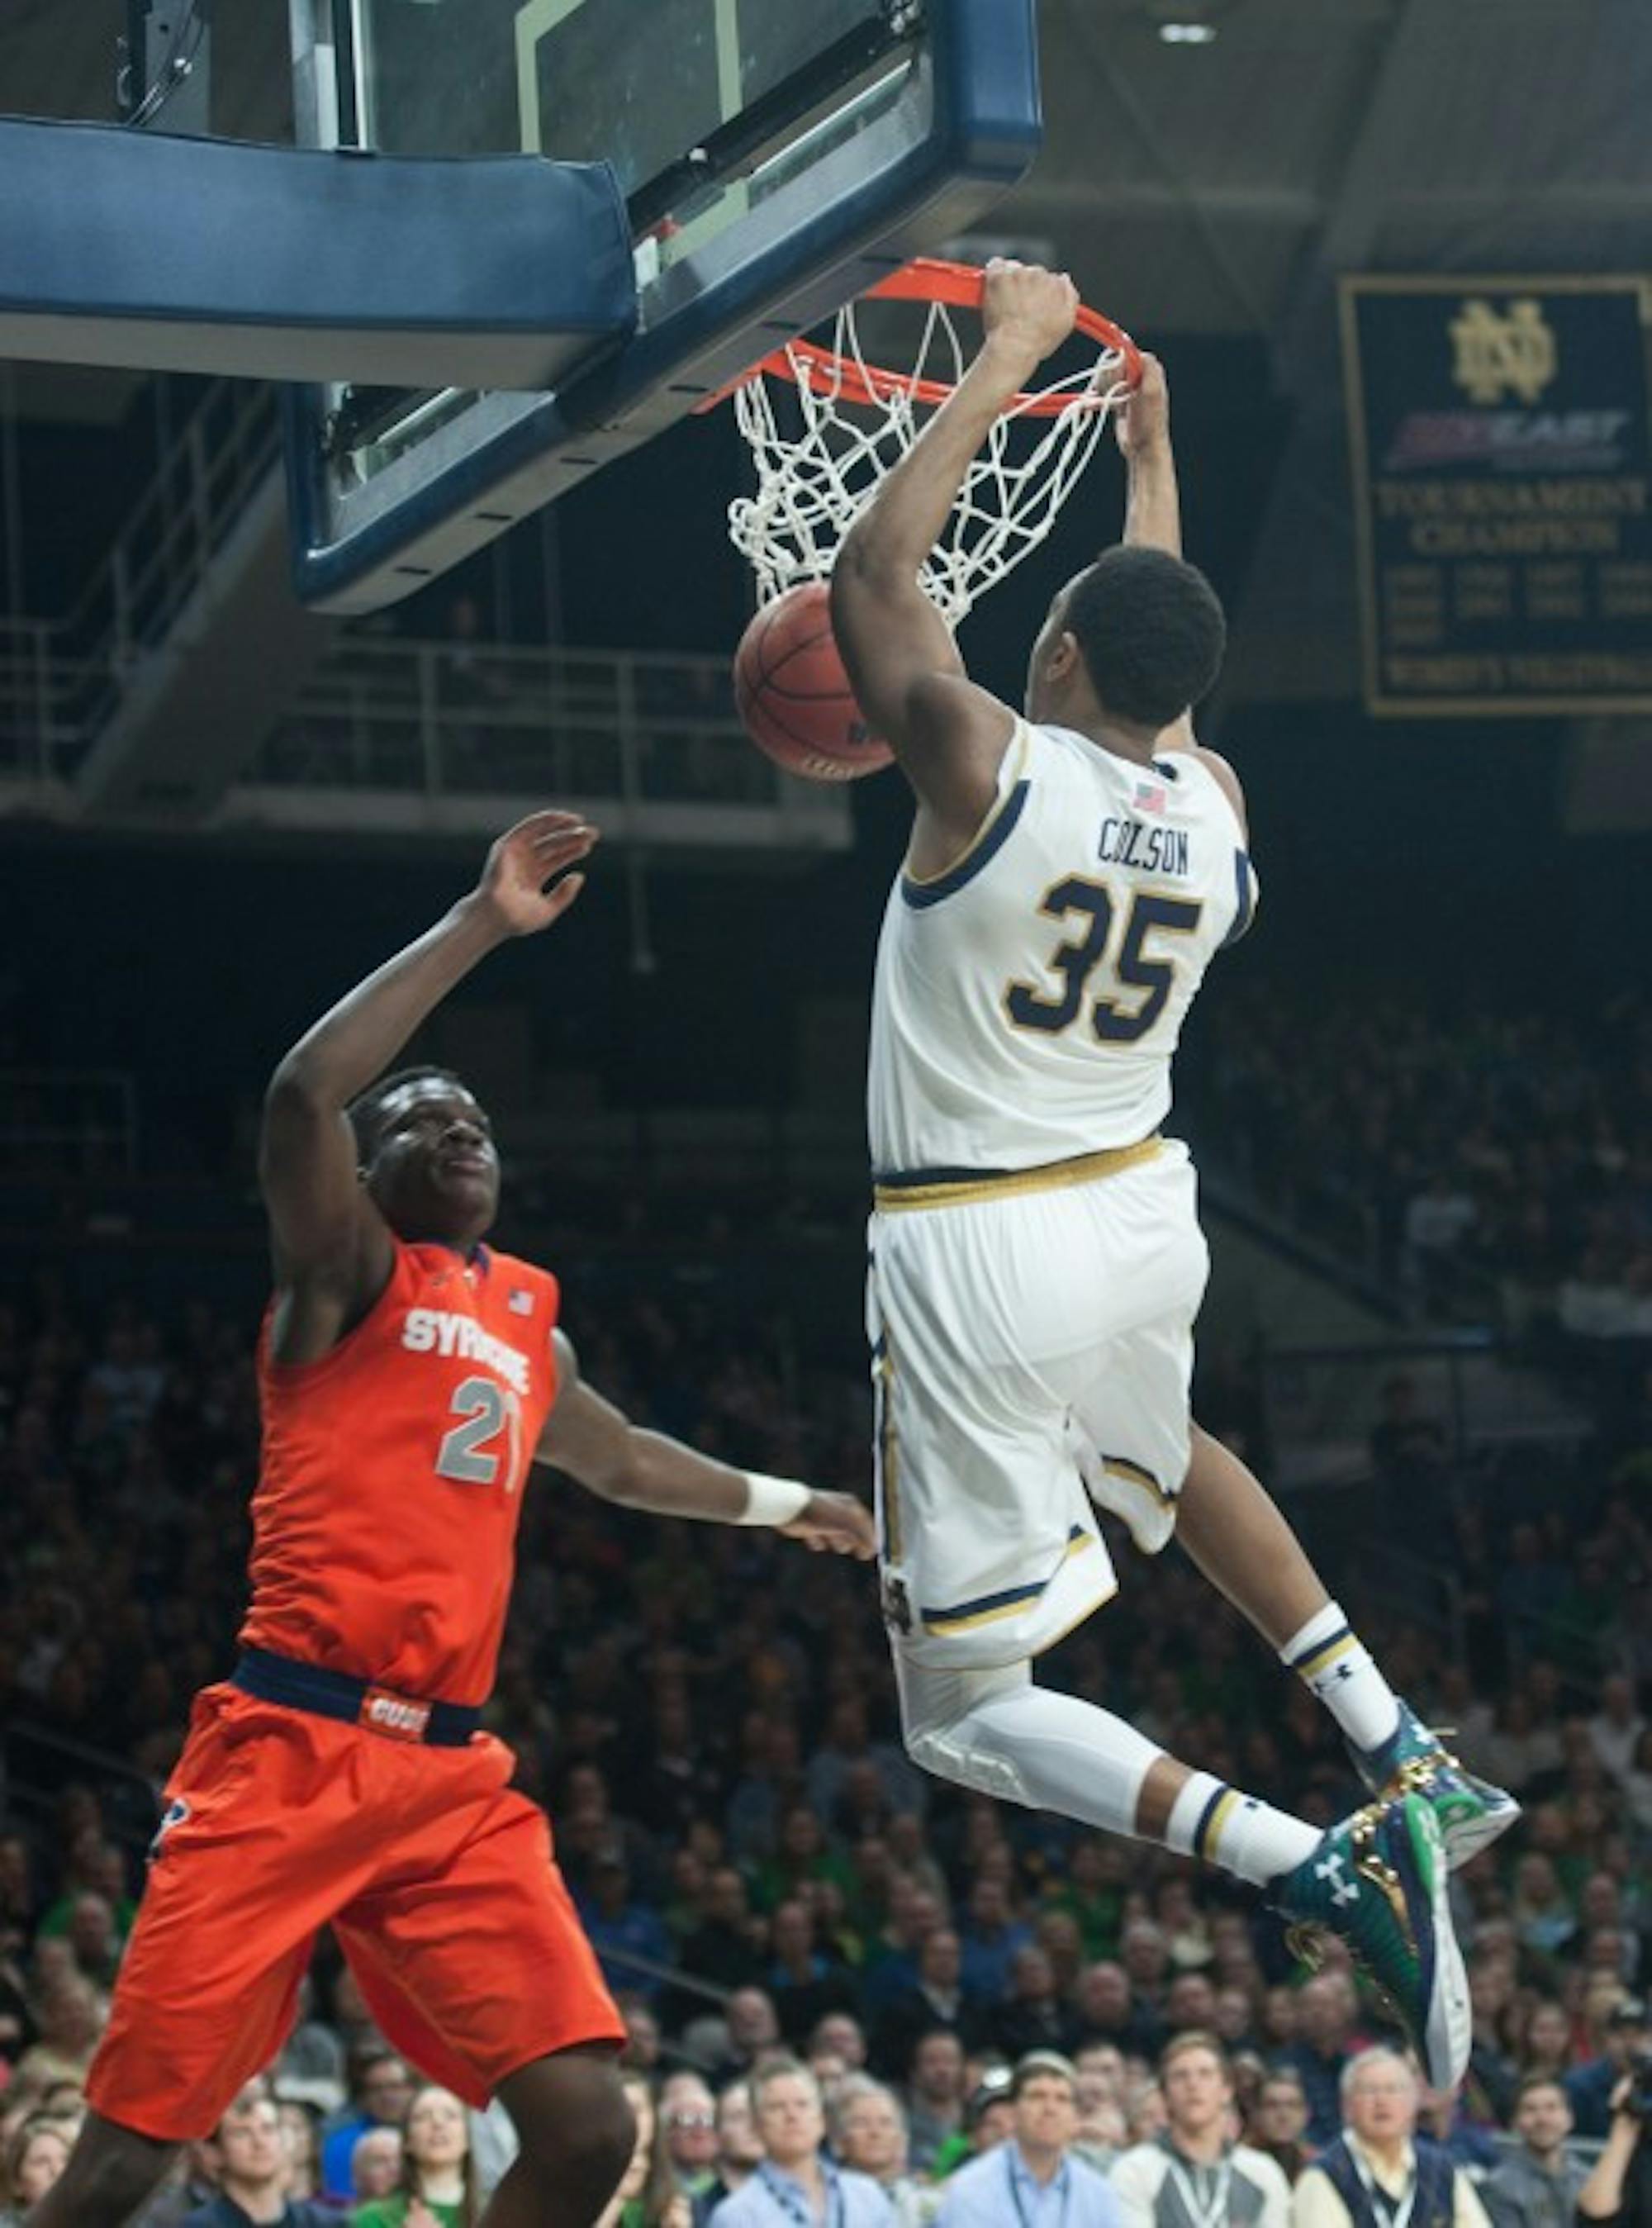 Freshman forward Bonzie Colson dunks the ball during Notre Dame’s 65-60 loss to Syracuse on Feb. 24 at Purcell Pavilion.